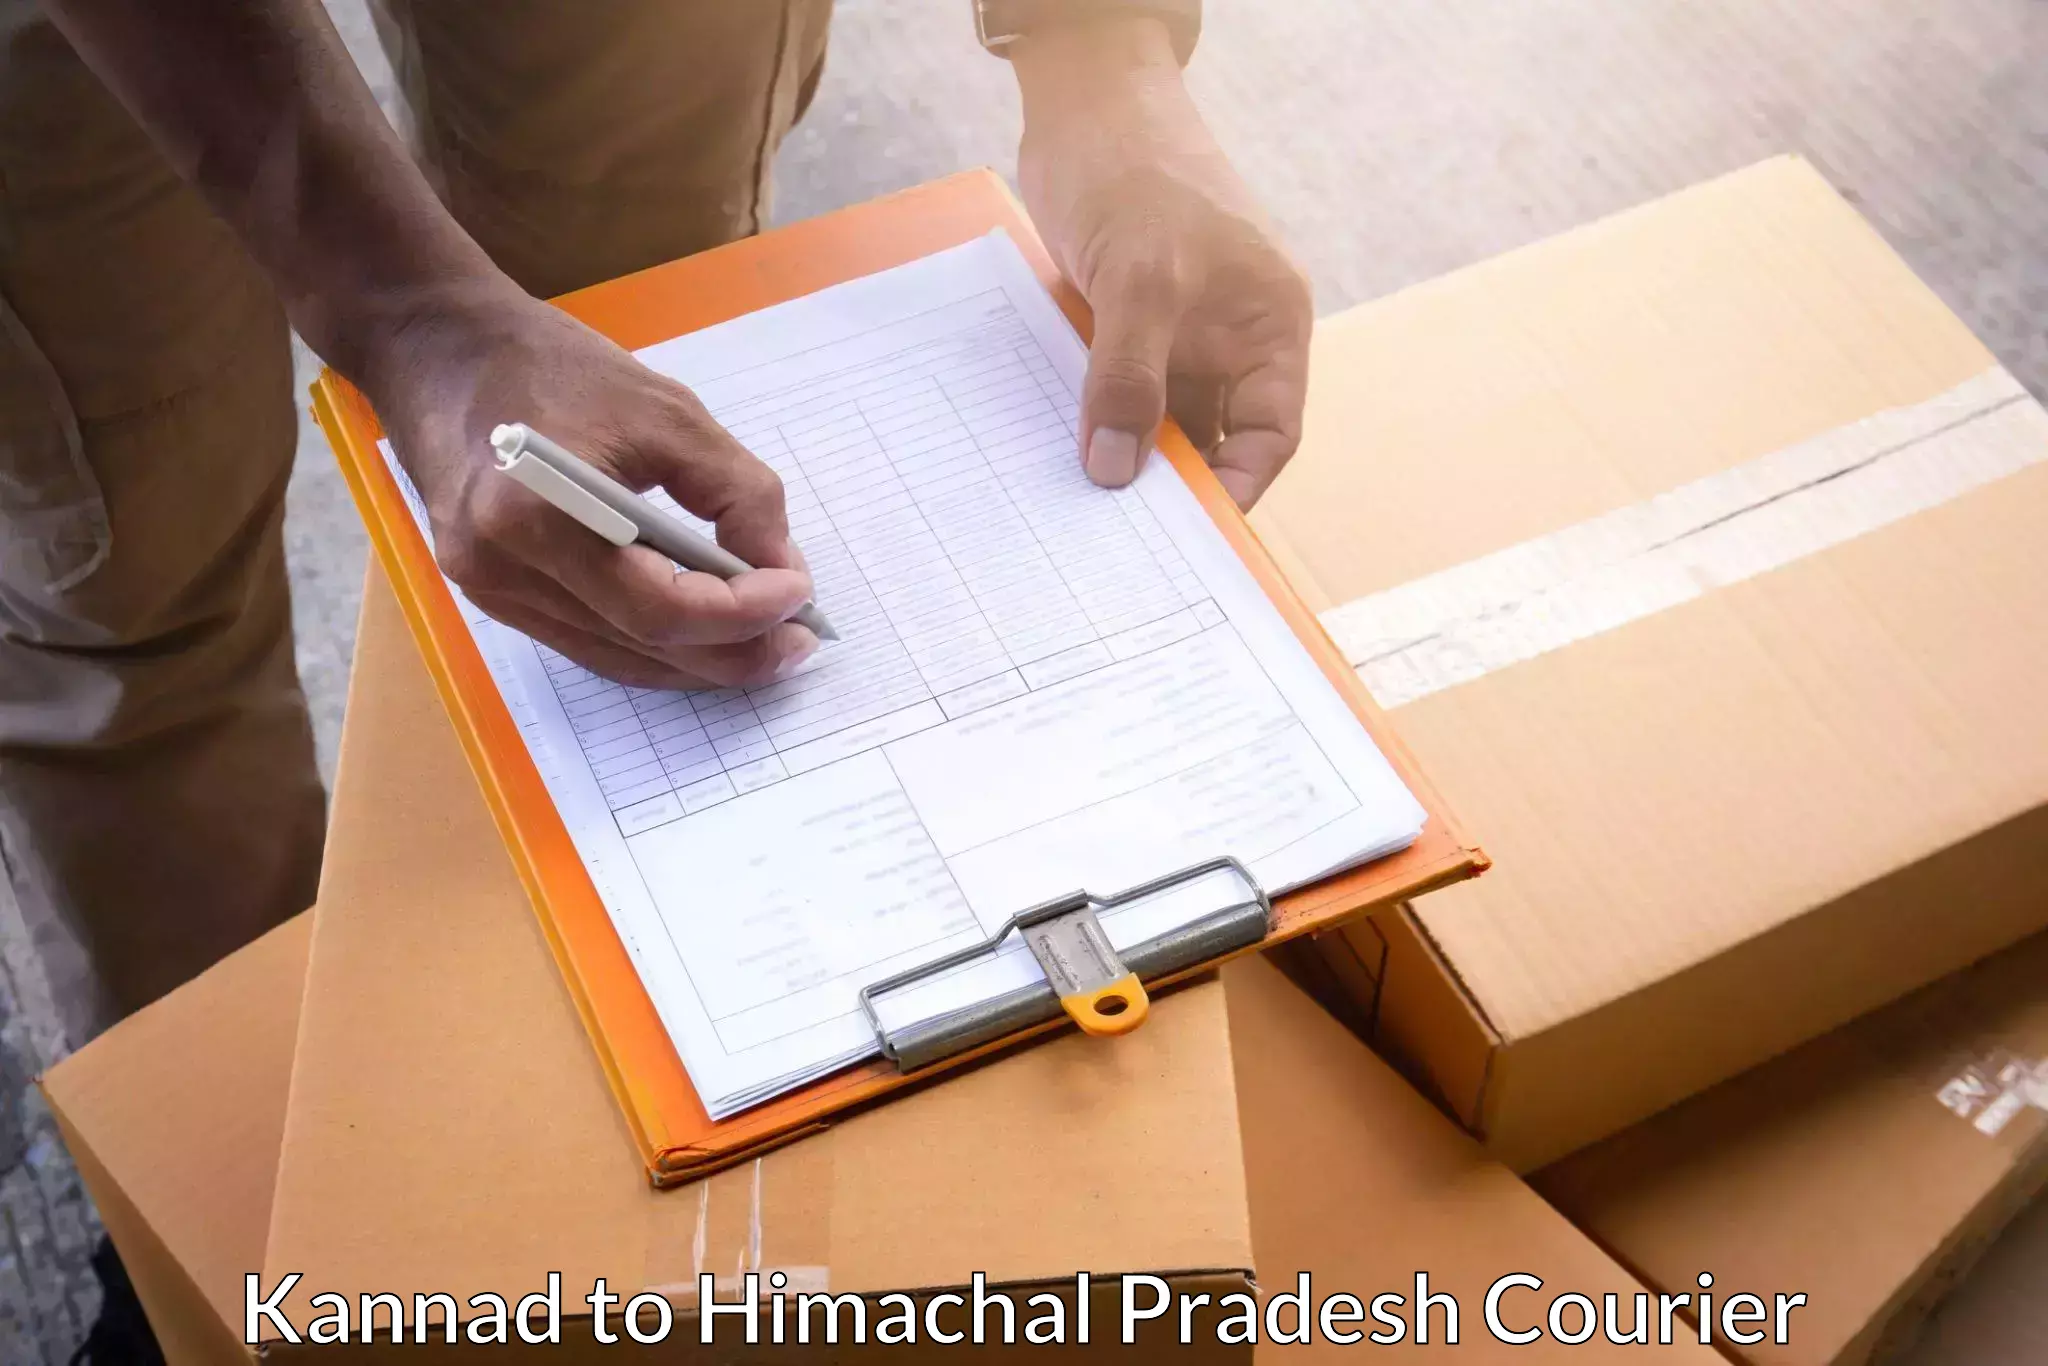 Full-service courier options Kannad to Una Himachal Pradesh